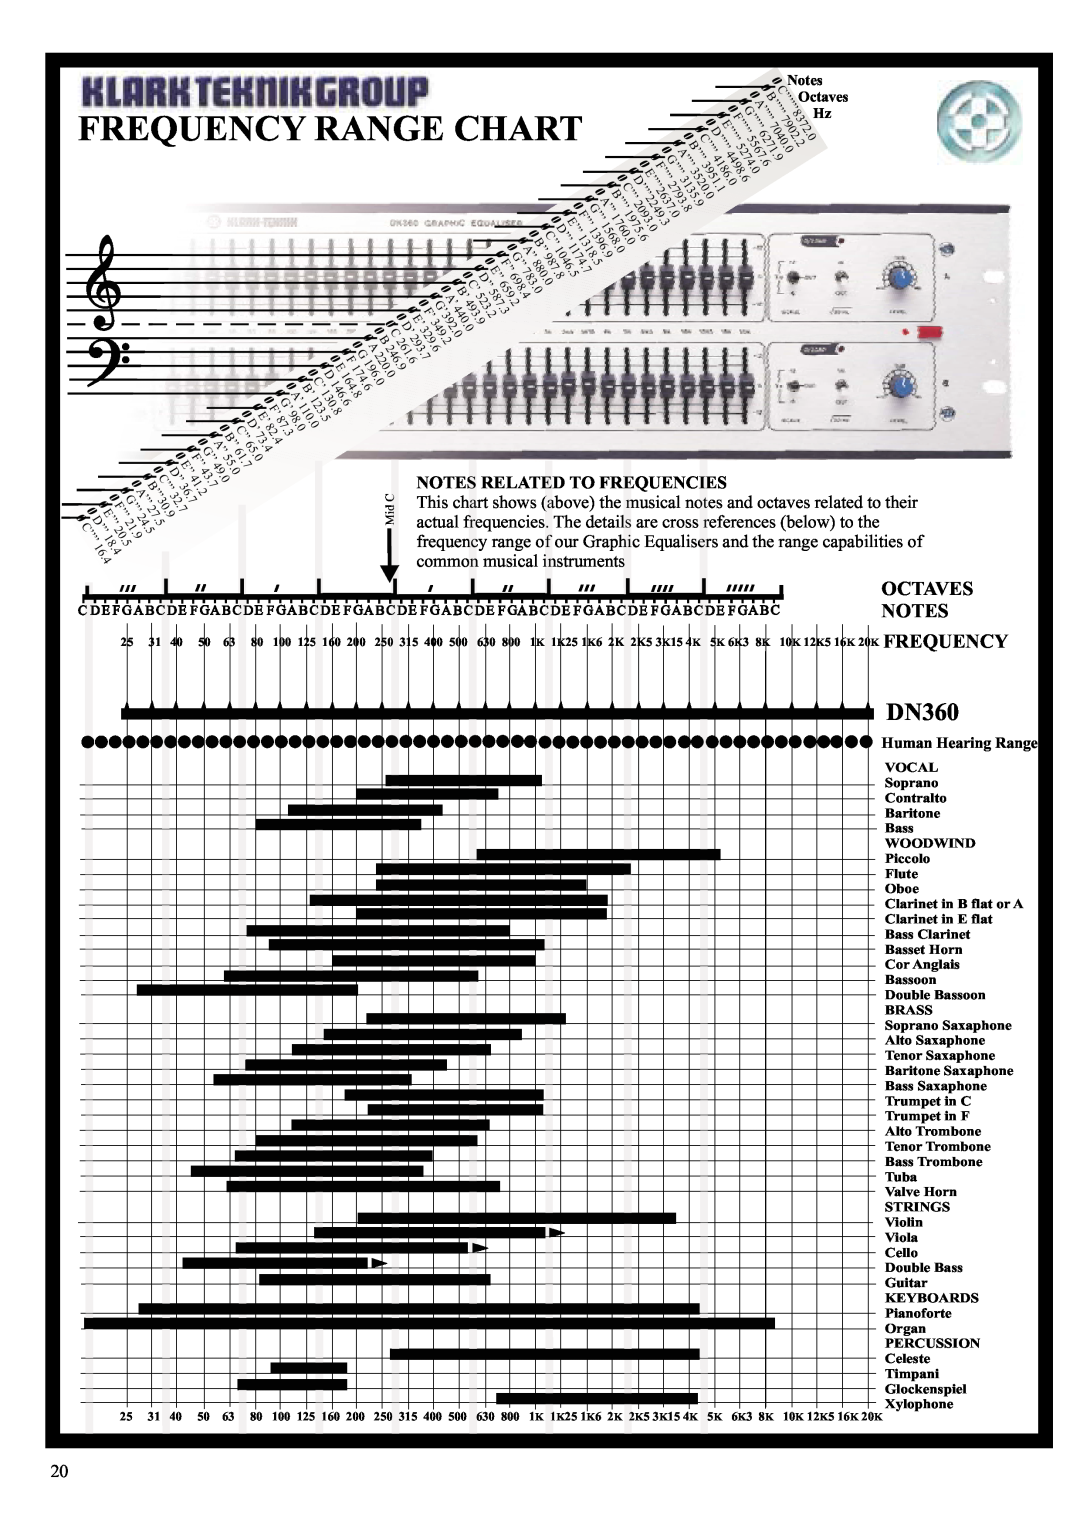 Klark Teknik DN360 manual Frequency Range Chart, ’’’’’, Octaves, Notes Related To Frequencies 